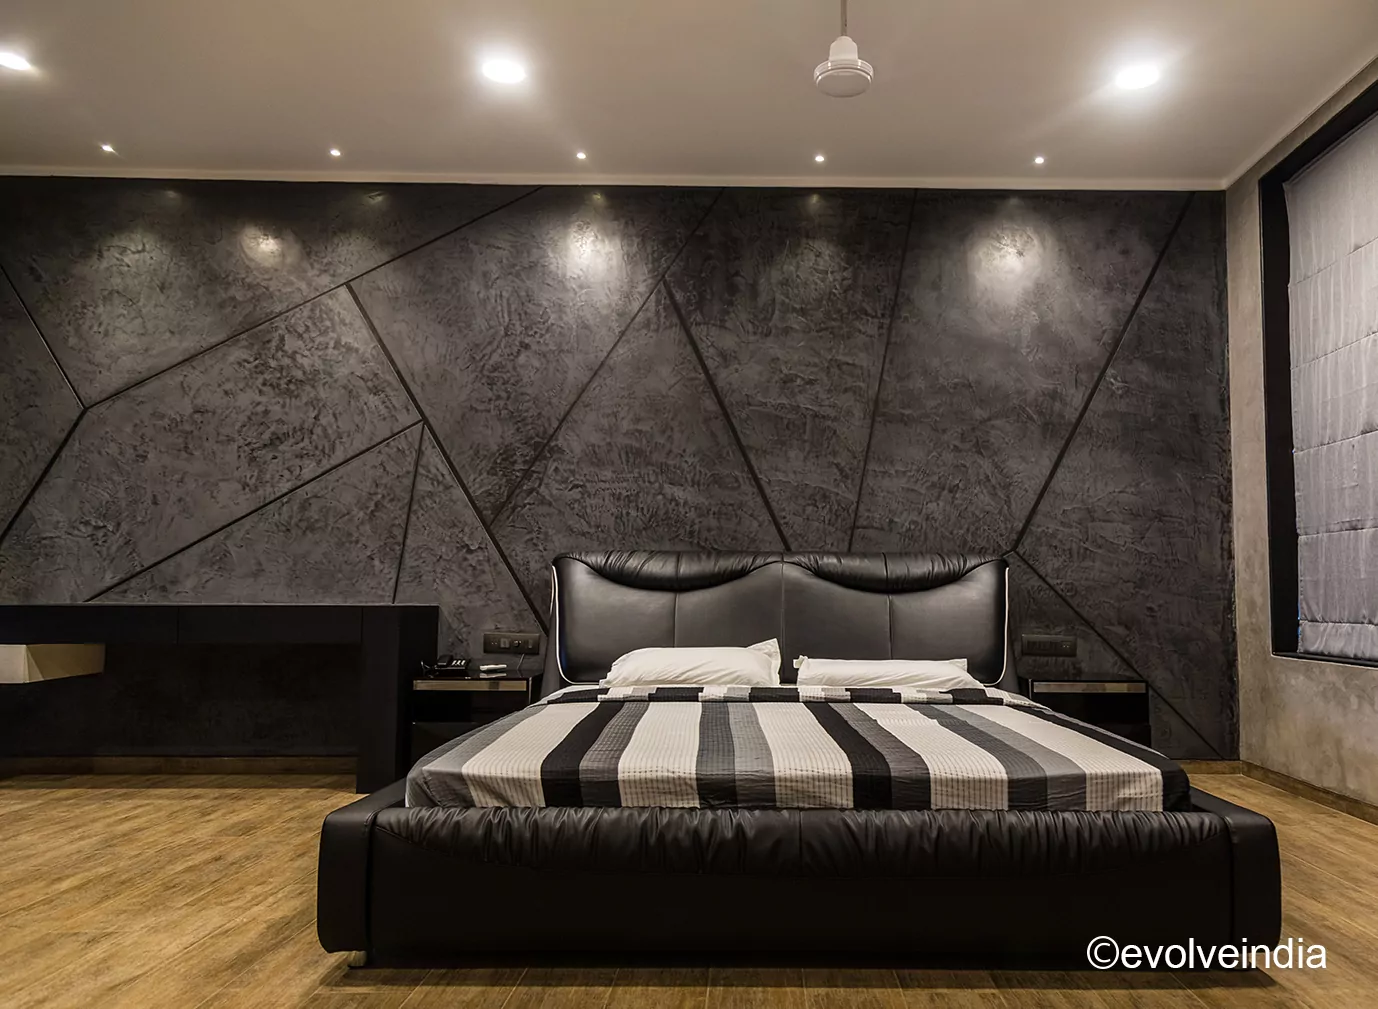 Accefnt wall designed by Evolve India using decorative concrete and liquid metal finish